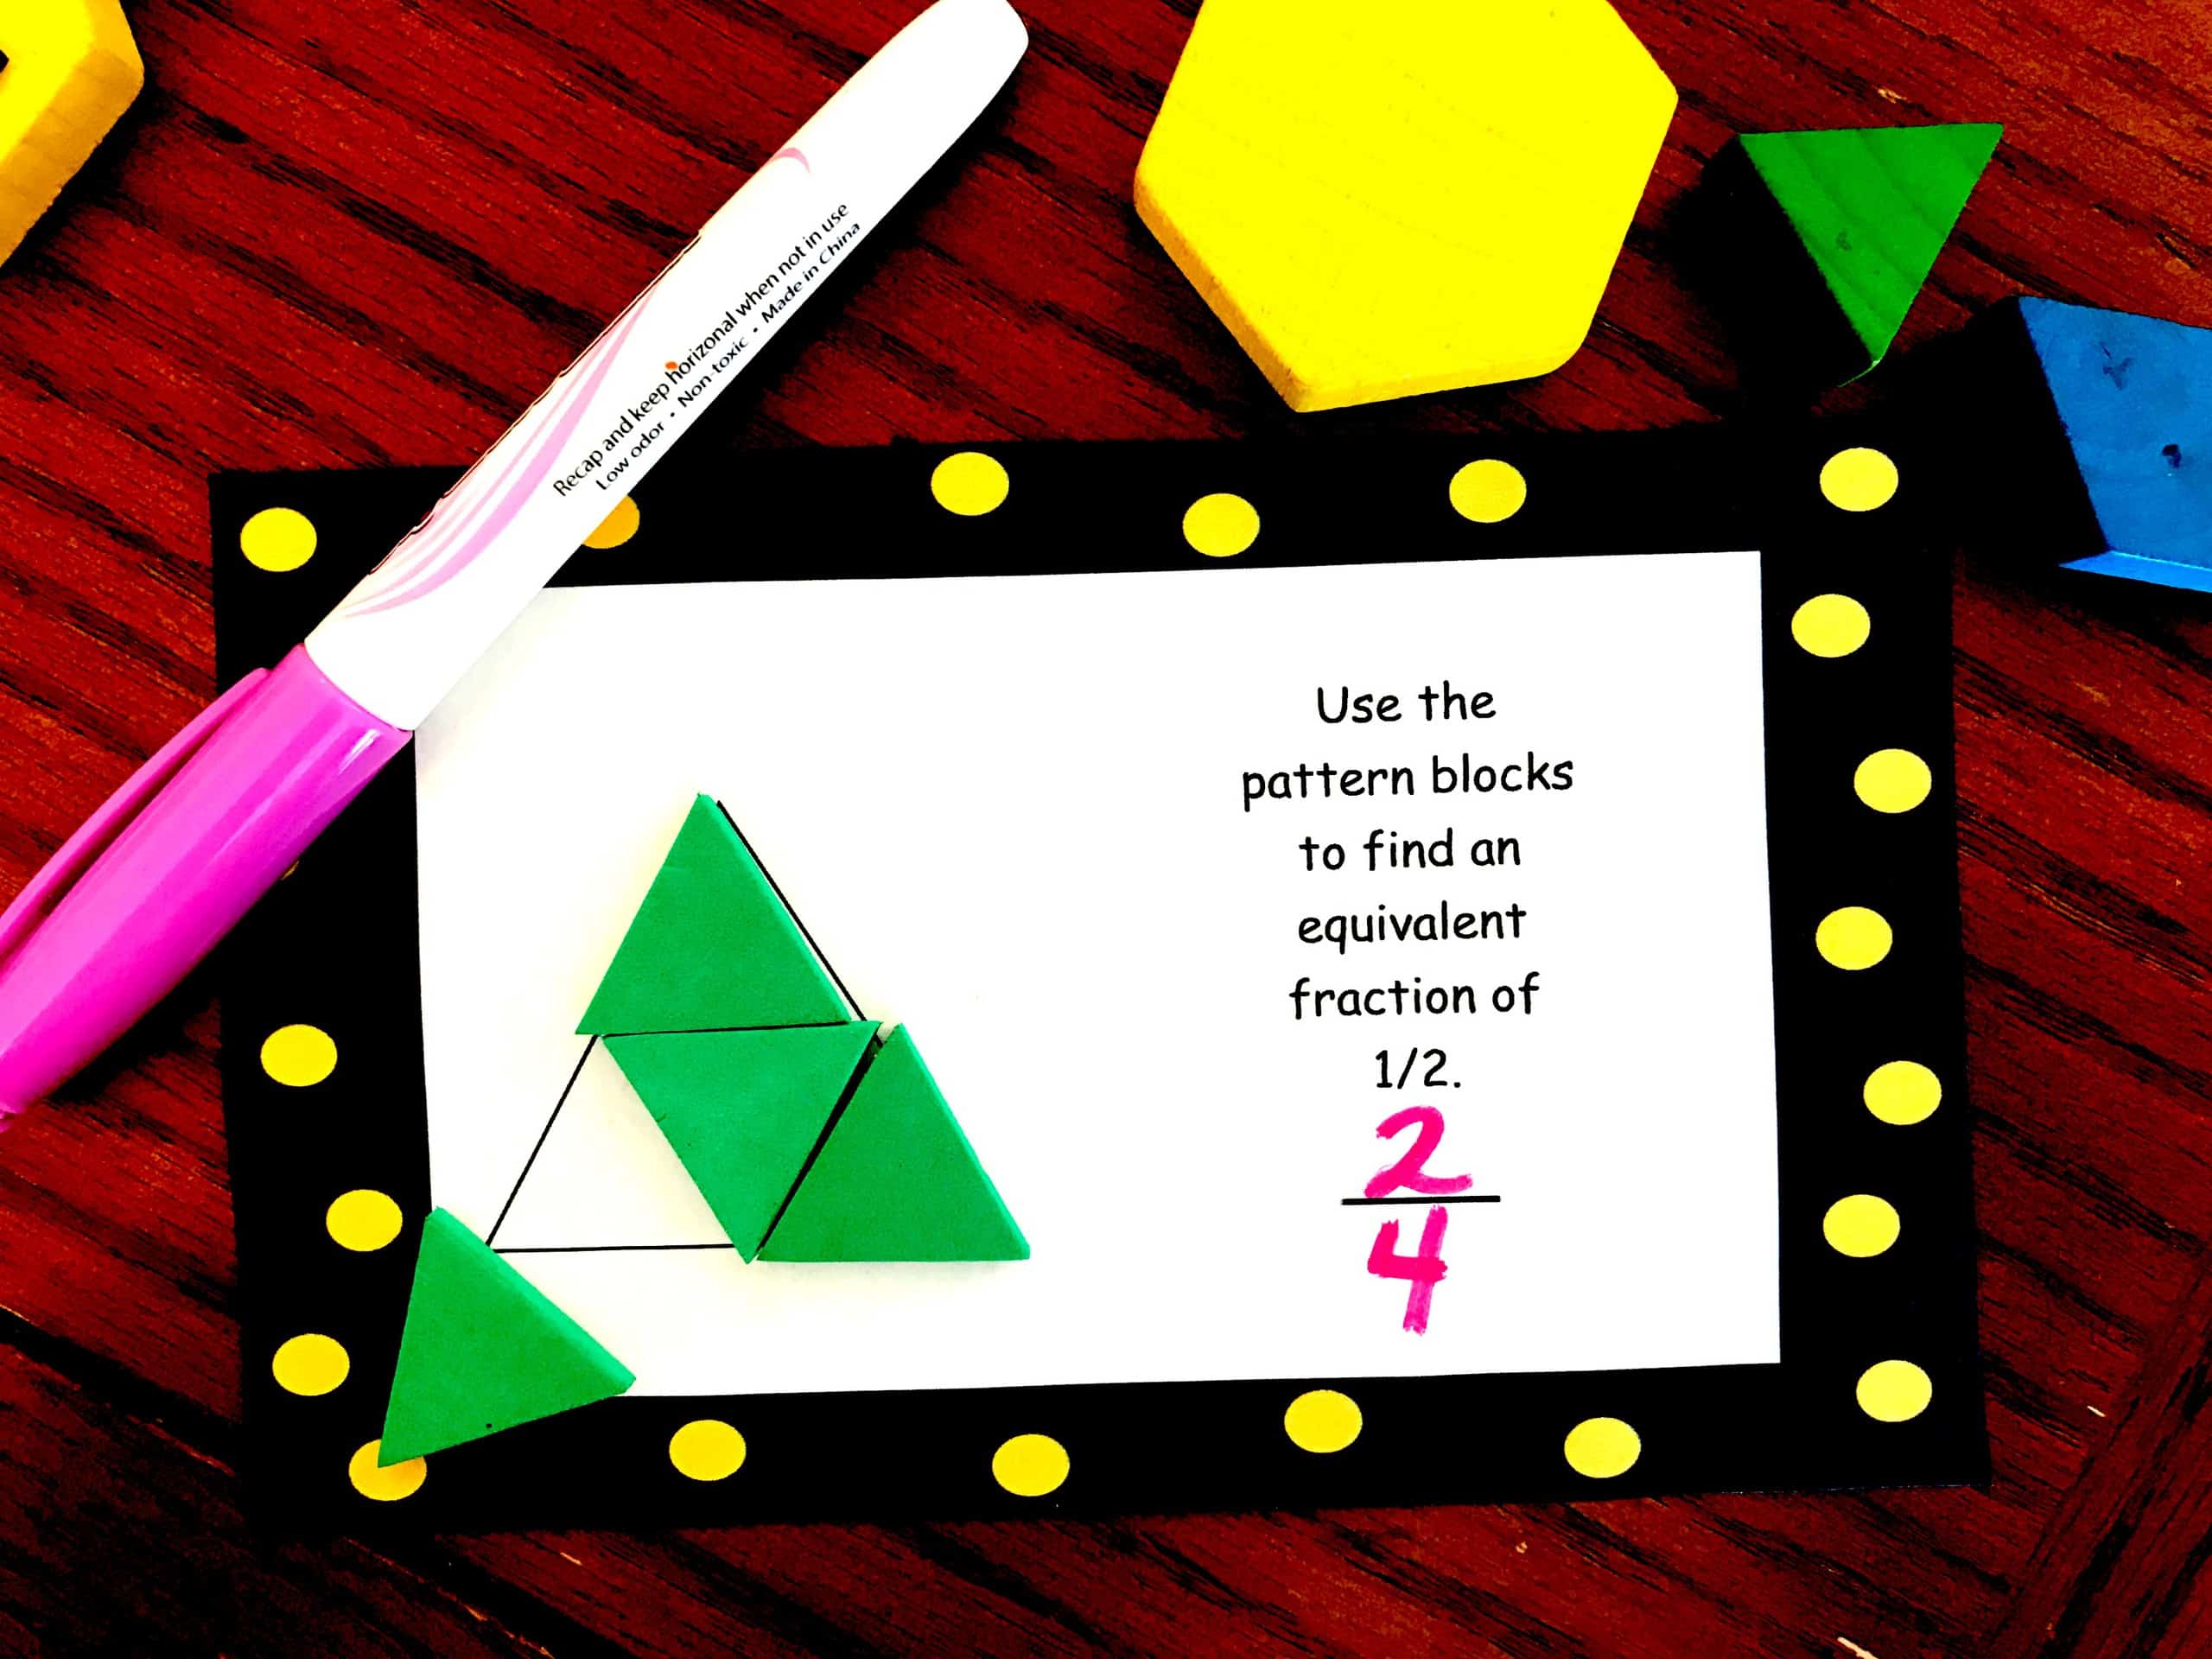 Fractions with pattern blocks task cards on a wooden table.